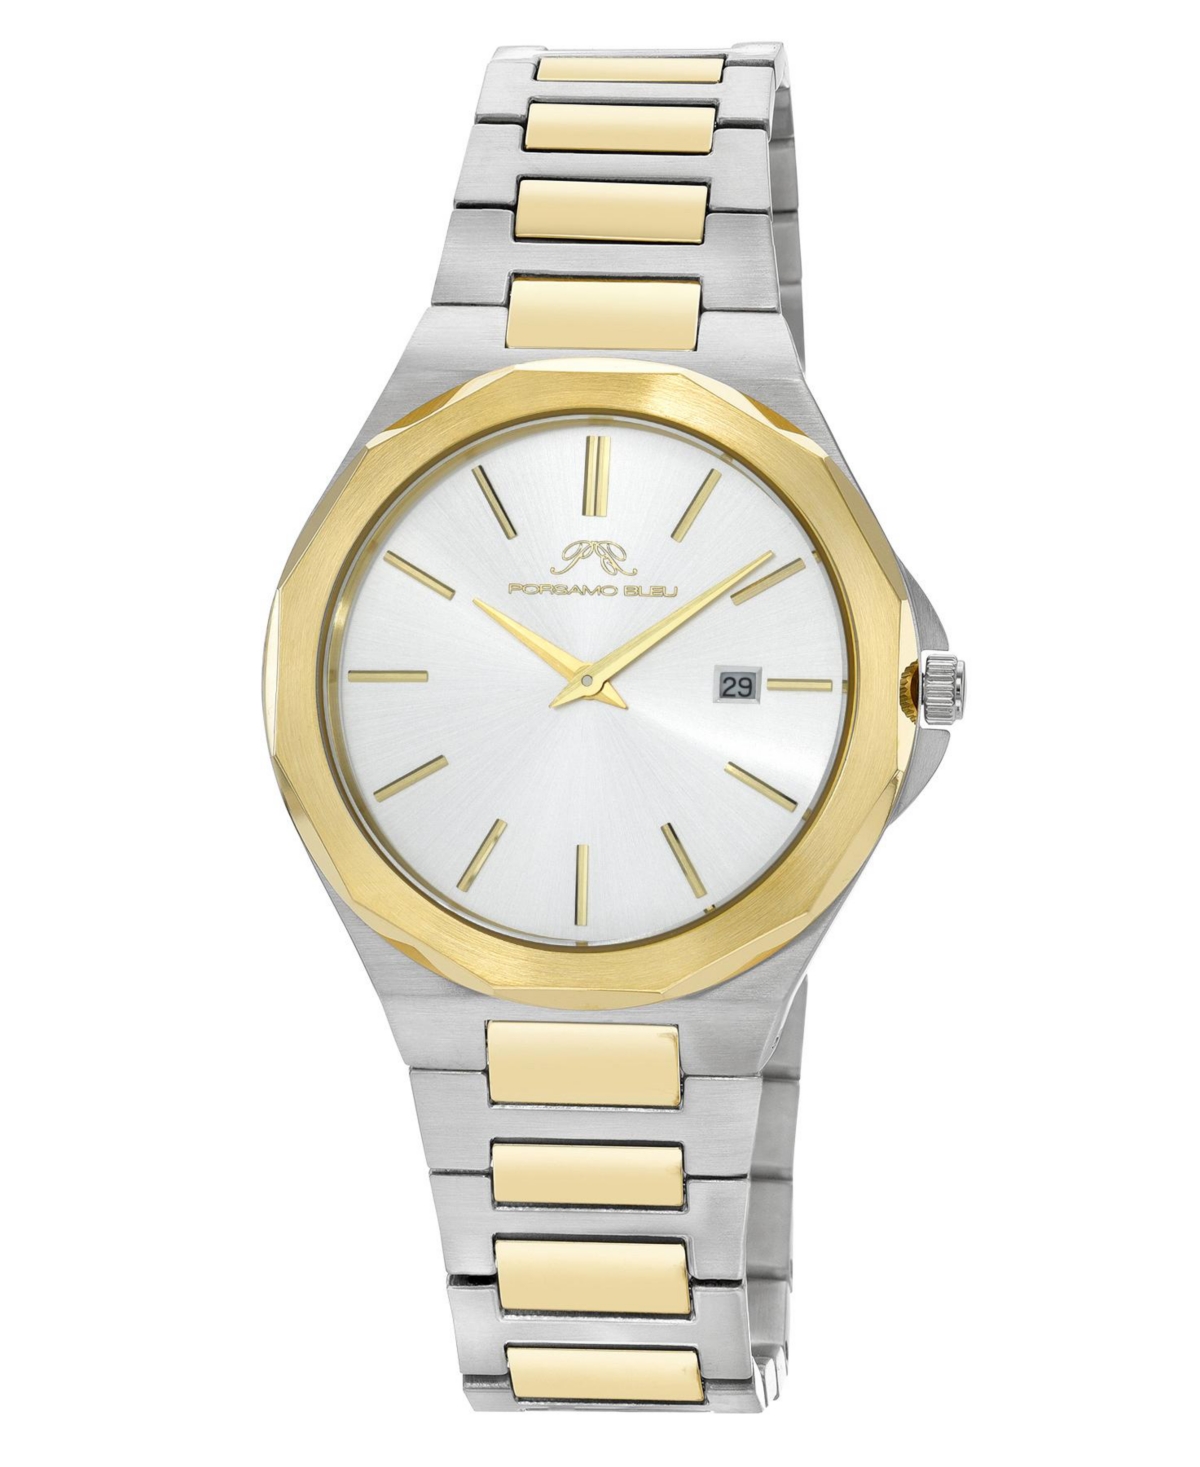 Alexander Stainless Steel Two Tone Men's Watch 1231CALS - Two-tone